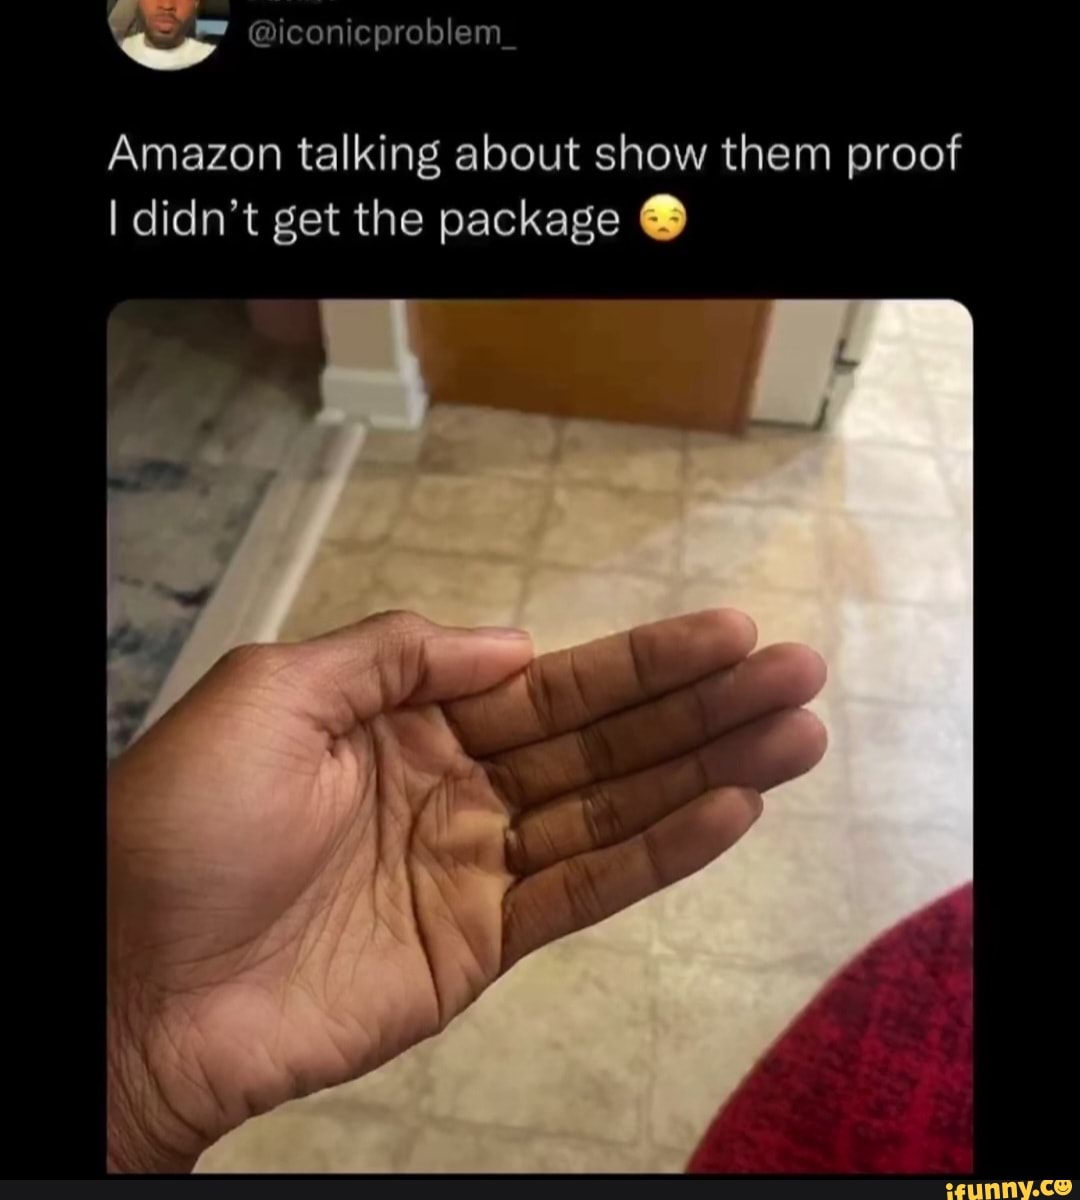 ss-iconicproblem-amazon-talking-about-show-them-proof-i-didn-t-get